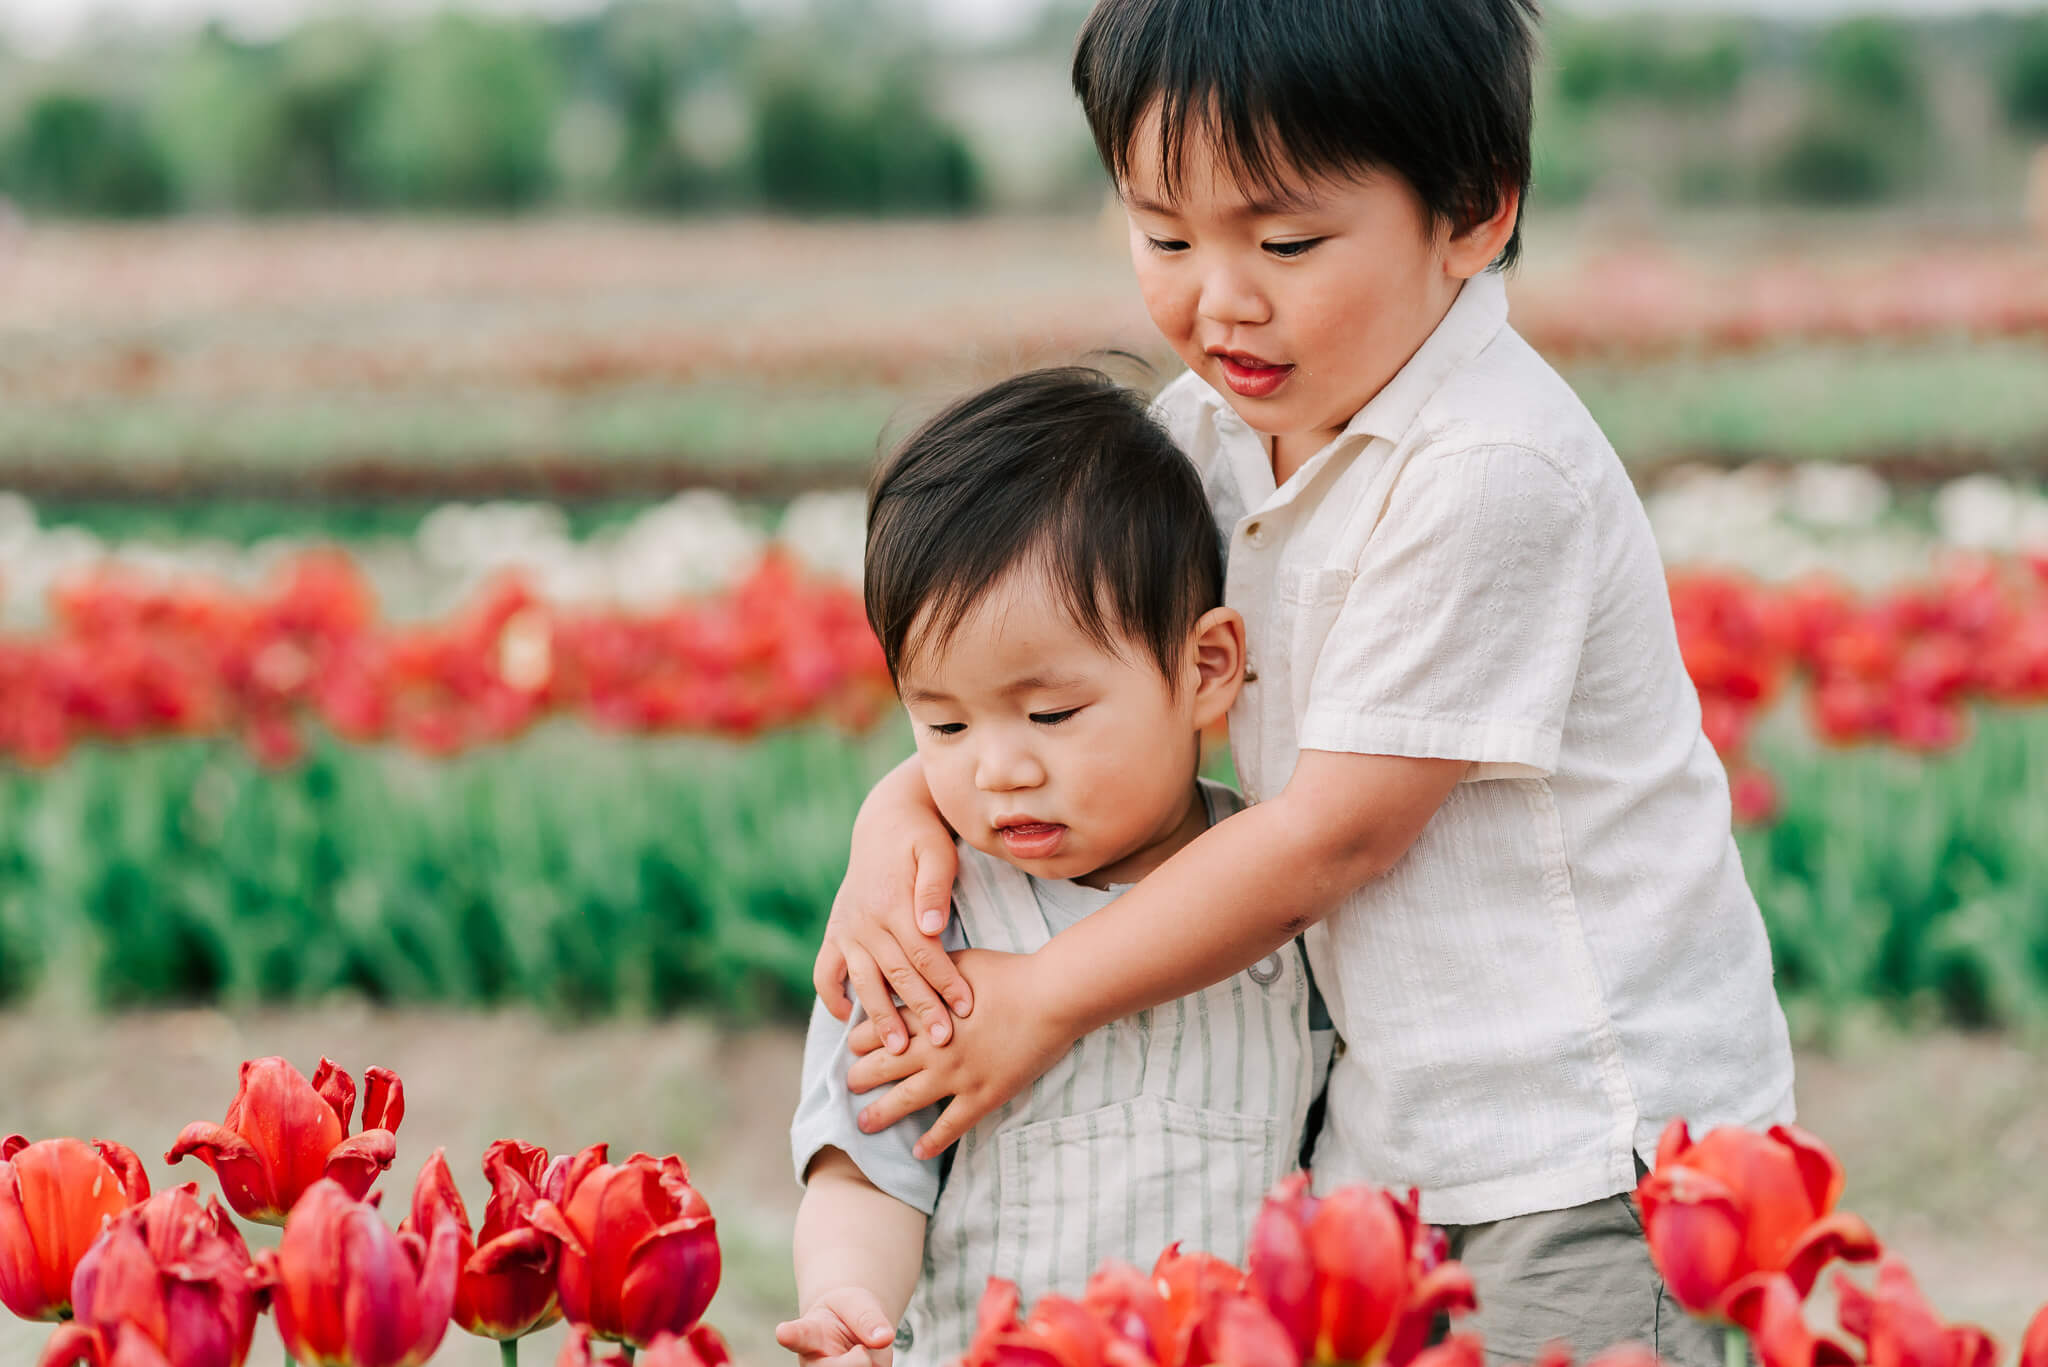 A young boy hugs his toddler brother as they adventure in a large flower garden things to do in fairfax